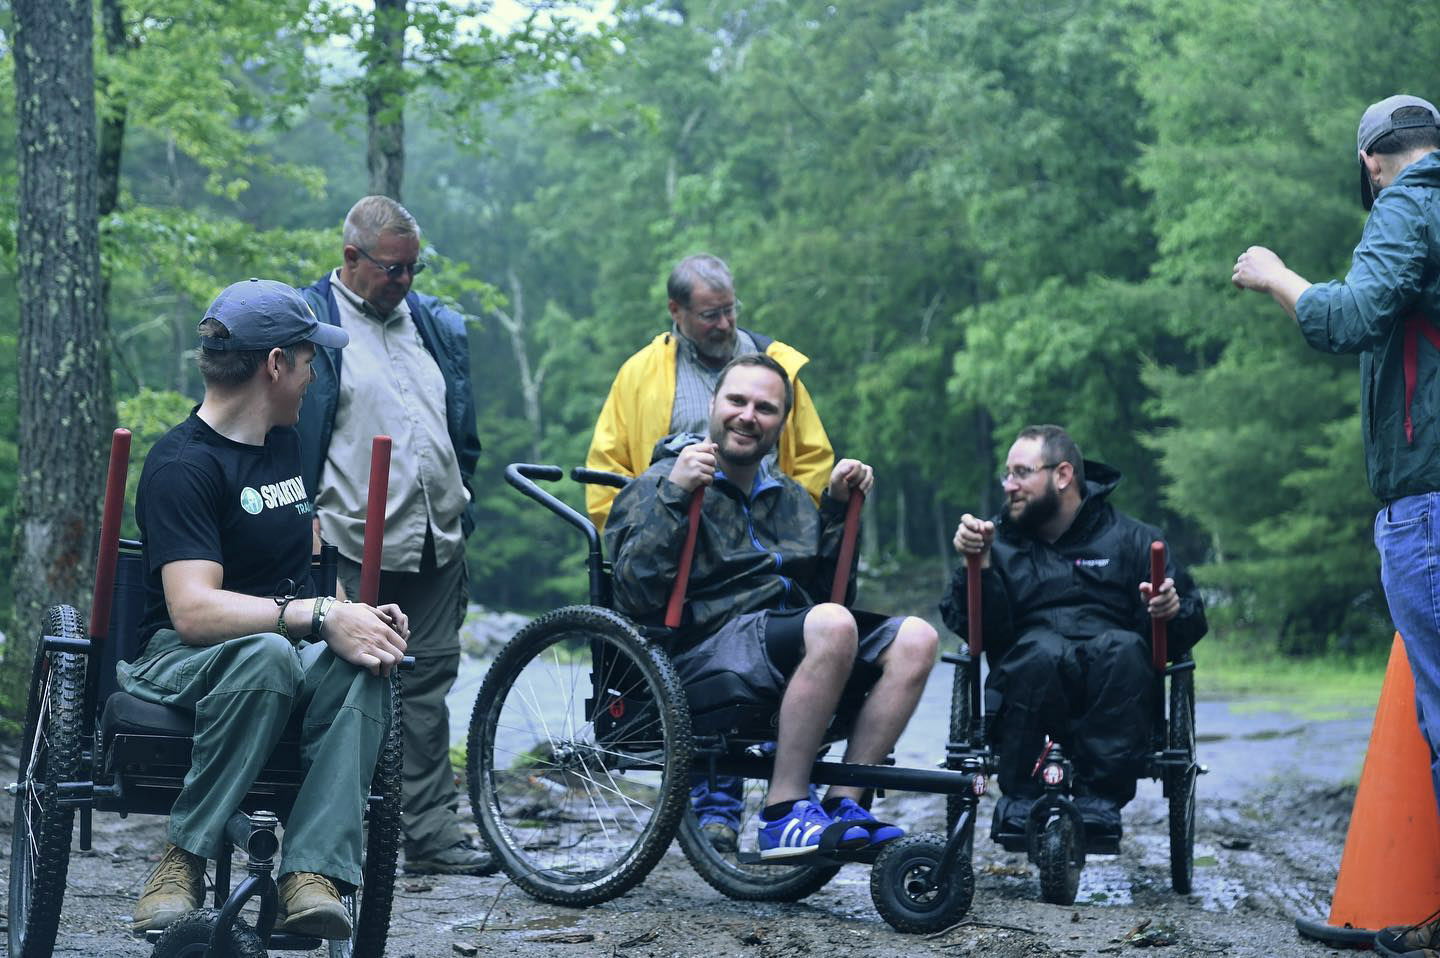 How to choose an all-terrain wheelchair: group of 5 including 3 hikers in GRIT Freedom Chair outdoor wheelchairs, chat on muddy hiking trail